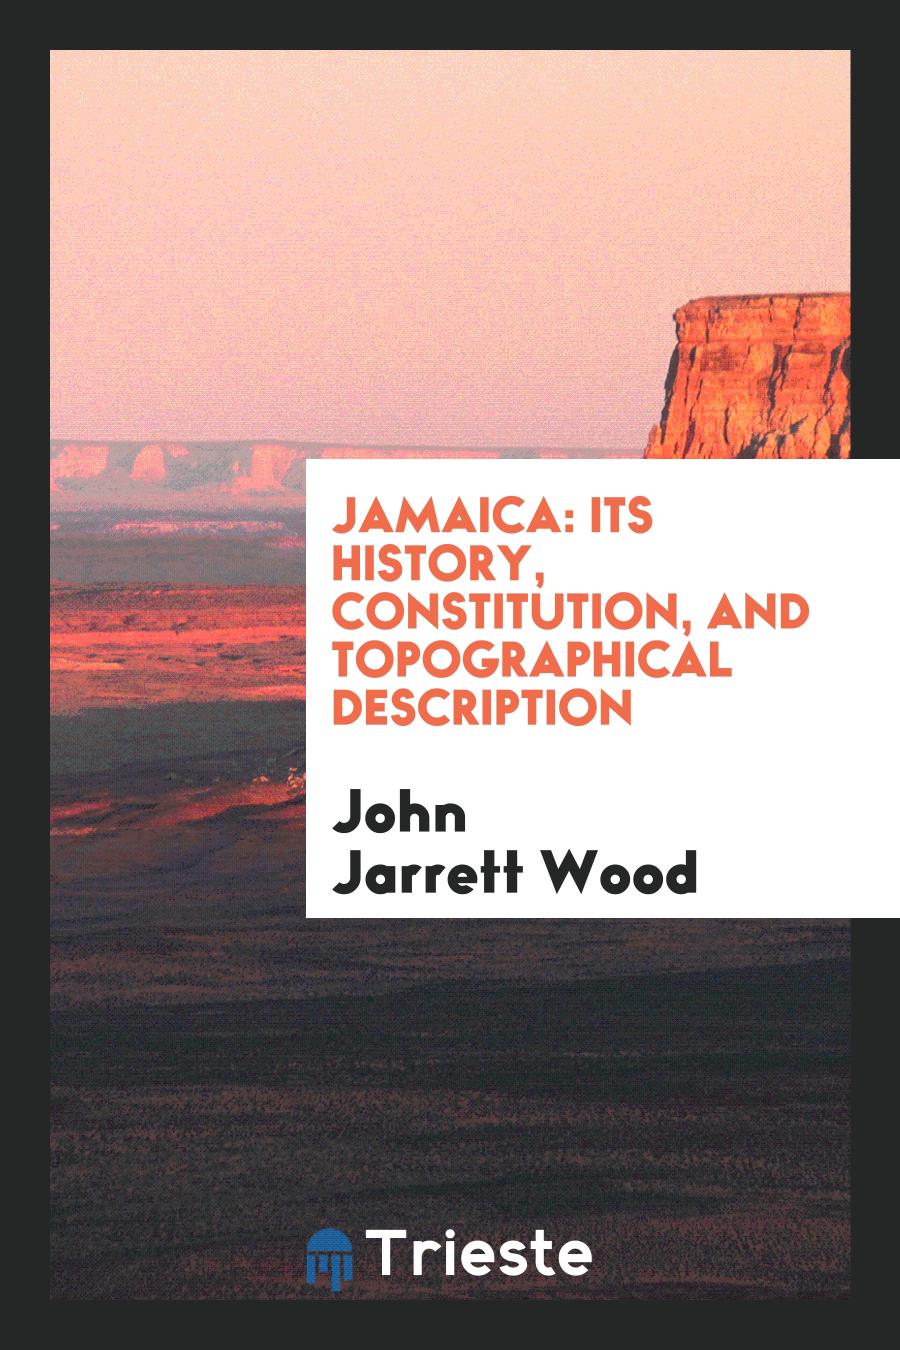 Jamaica: its History, Constitution, and Topographical Description